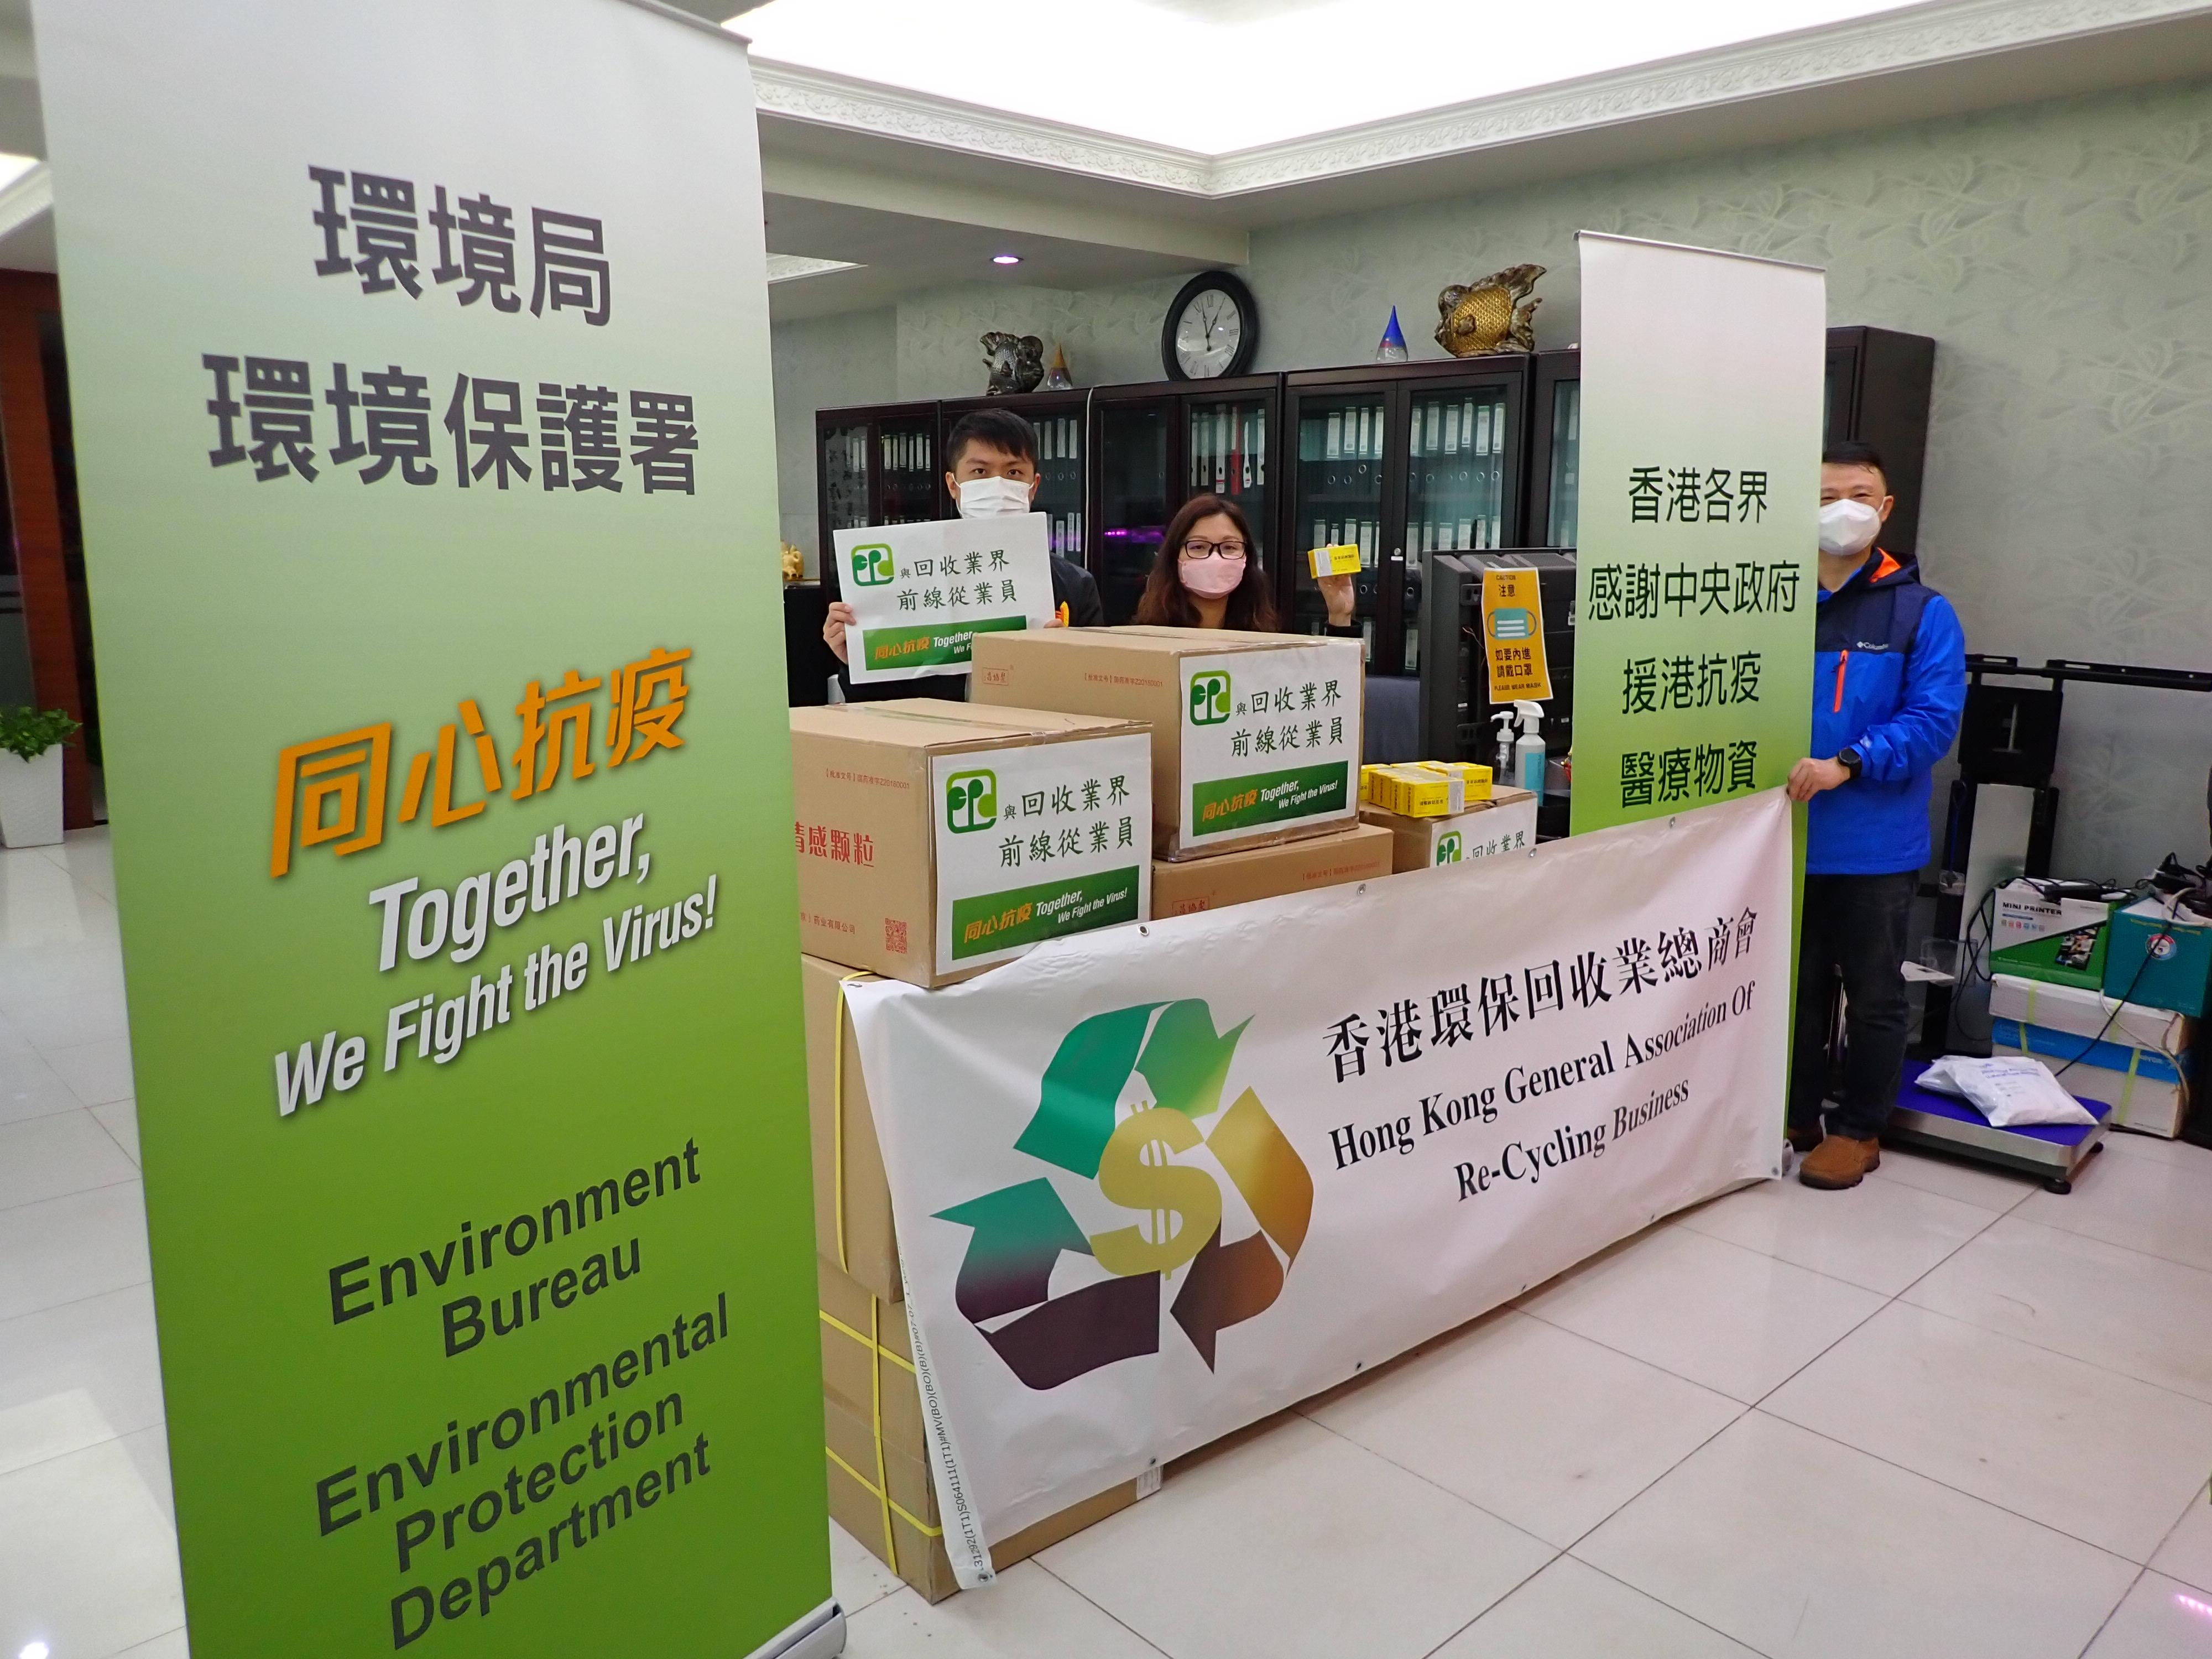 The Environmental Protection Department (EPD) has distributed a total of about 24 000 rapid antigen test (RAT) kits and 24 000 boxes of anti-epidemic proprietary Chinese medicines donated by the Central Government to various recycling trade associations and recycling service contractors, so as to provide anti-epidemic support to the frontline staff. Picture shows EPD staff distributing RAT kits and anti-epidemic proprietary Chinese medicines to a representative of the Hong Kong General Association of Re-Cycling Business.